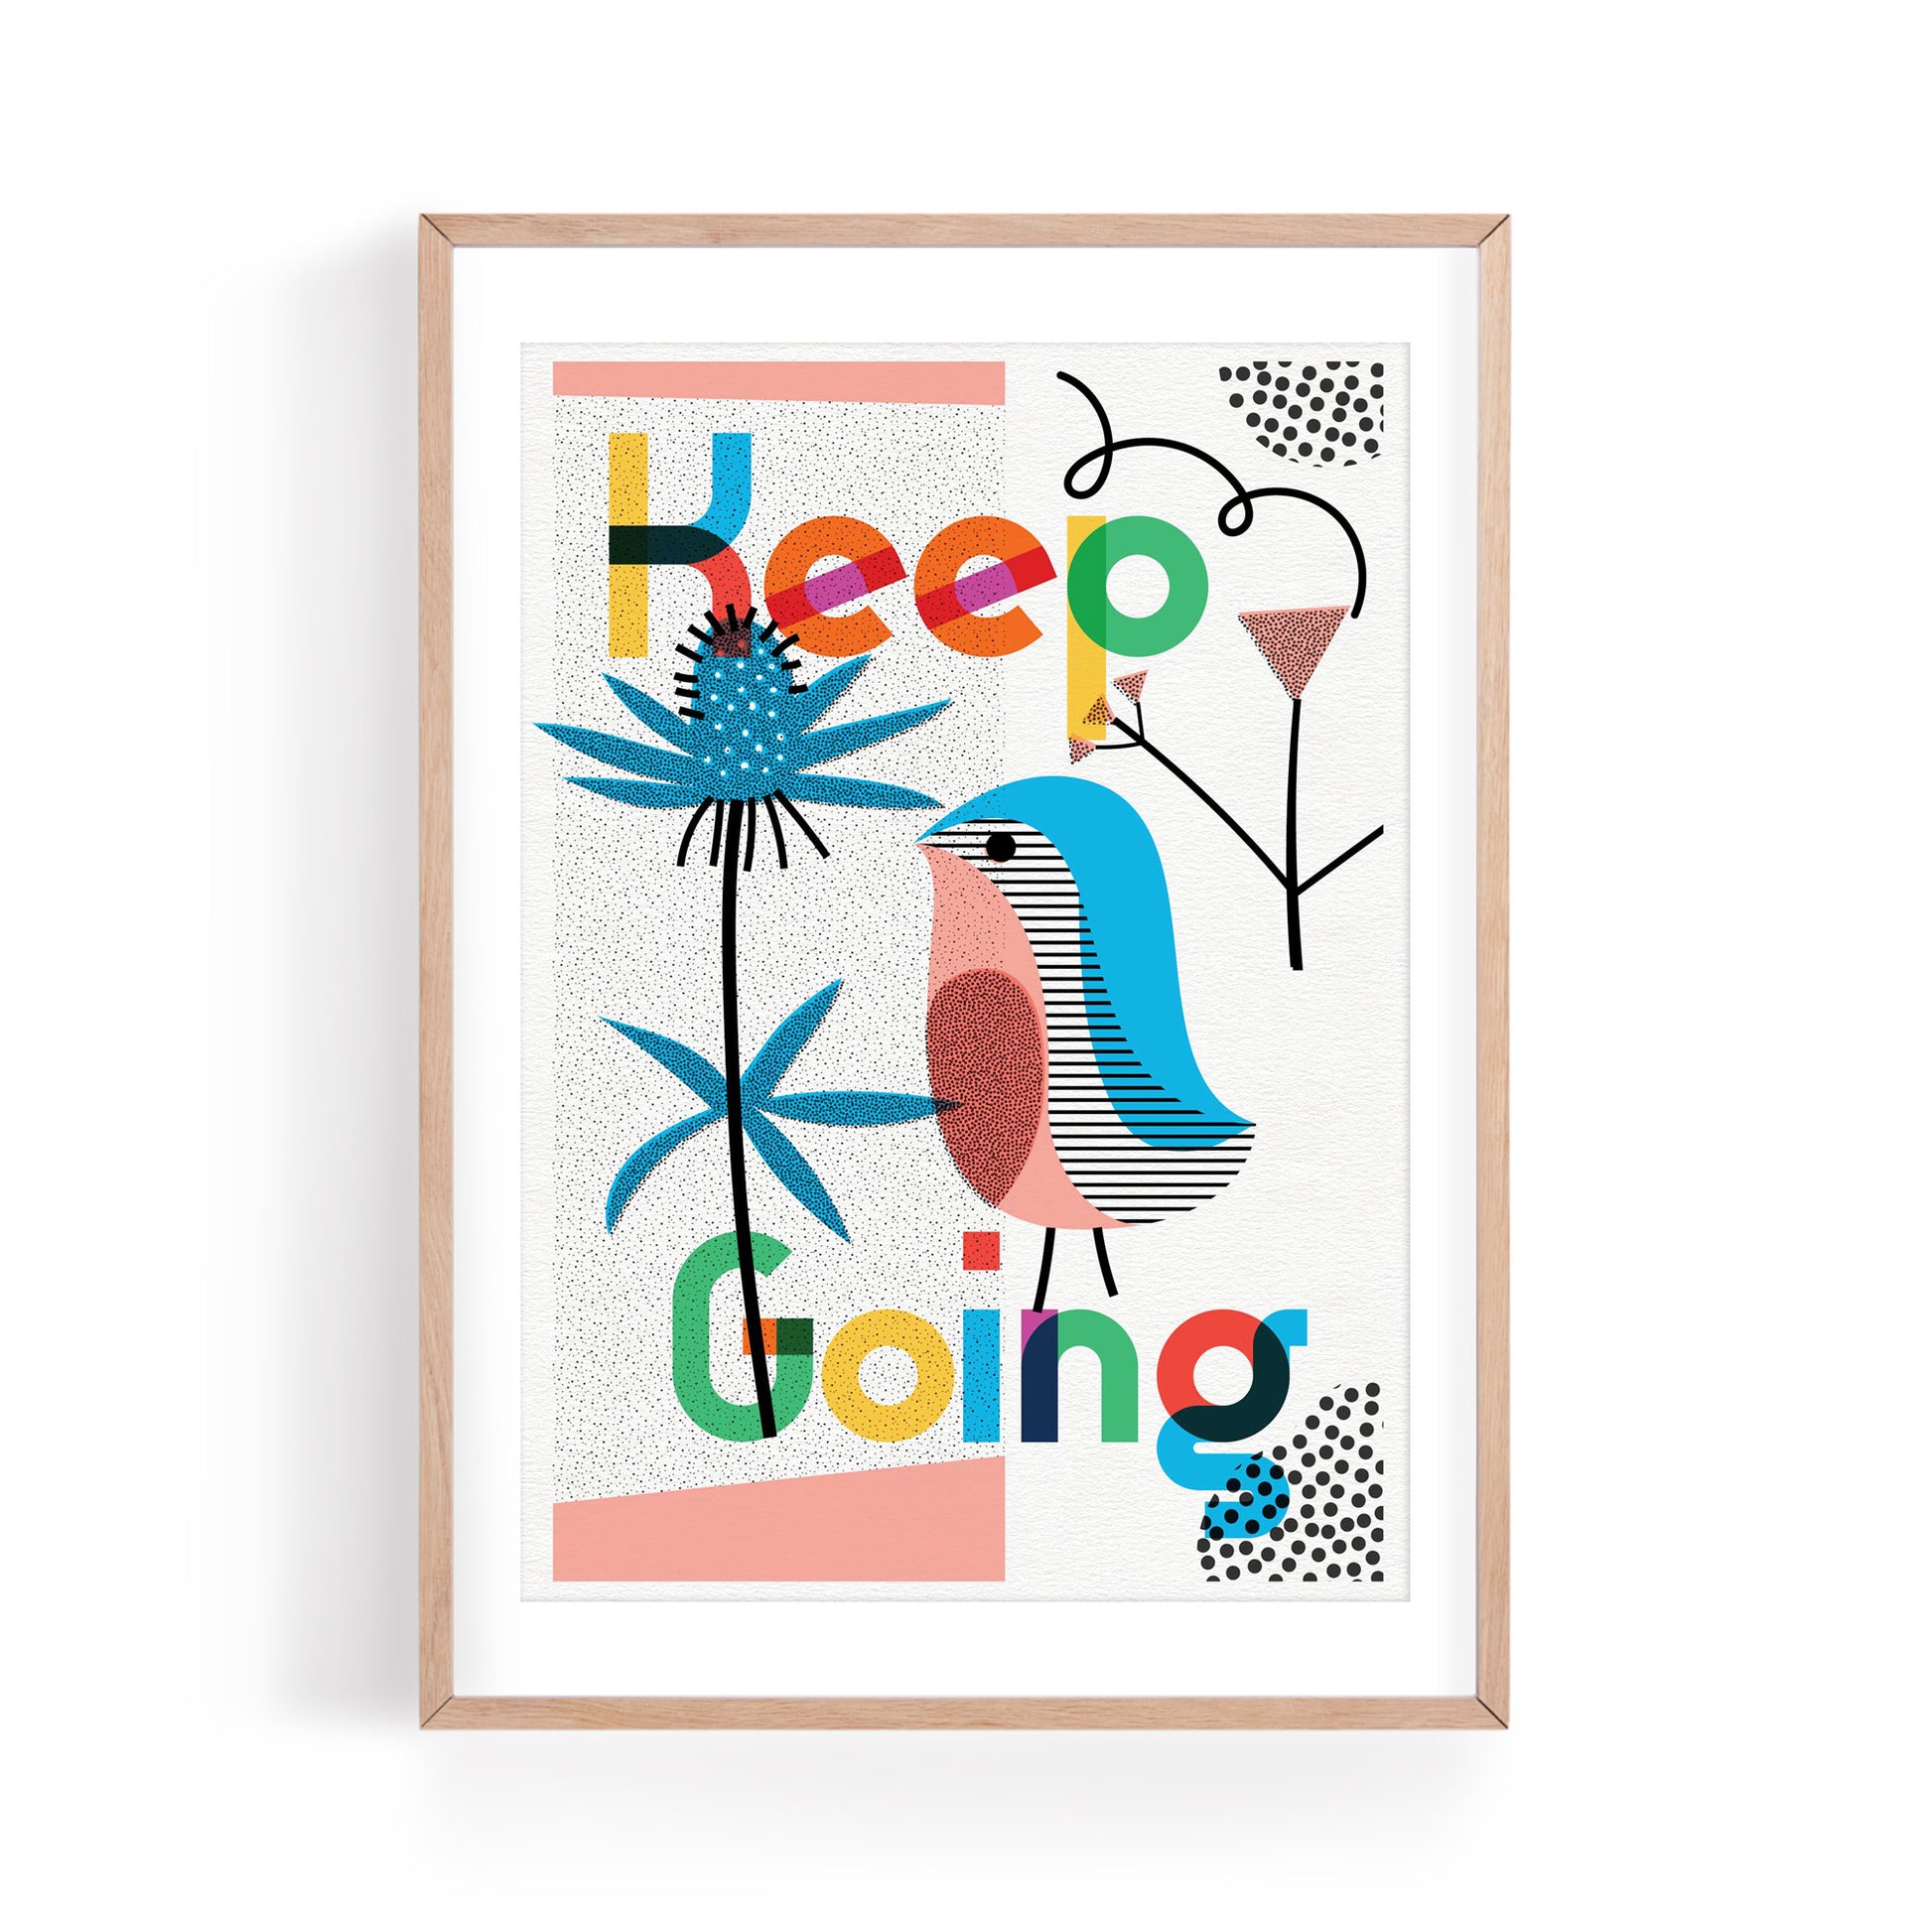 Keep Going A5 Art Print by The Print Lass. Shown in light wood frame (not included)